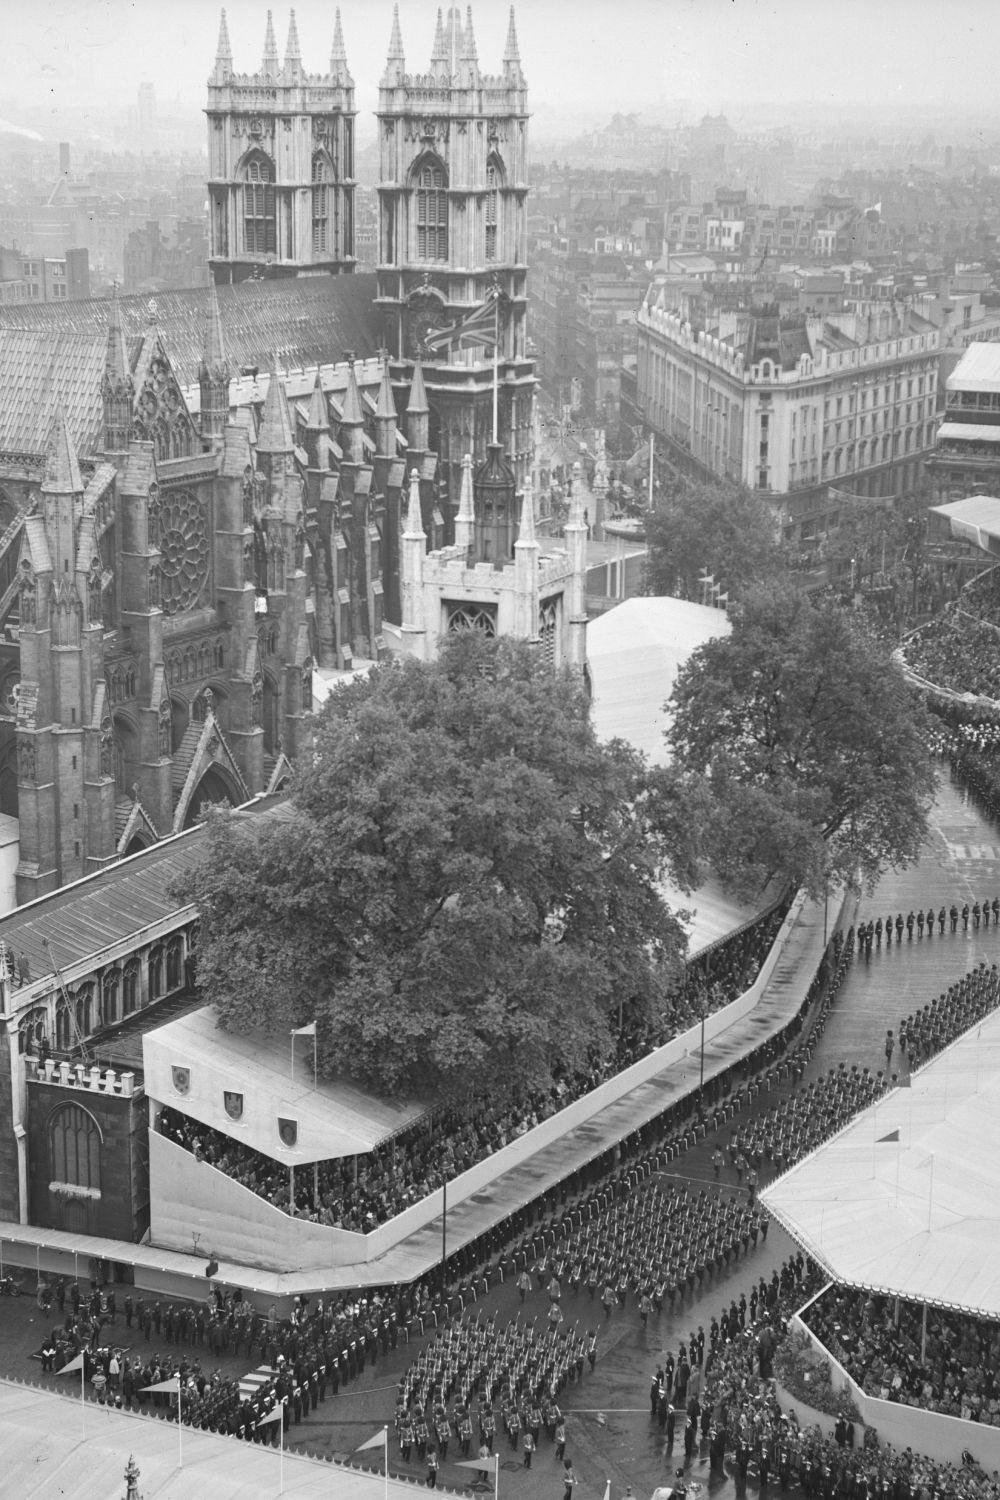 <p>                     Westminster Abbey was actually closed for five months ahead of the event to prepare for the Queen's Coronation. This involved a fair bit of maintenance work, including felting and boarding the floor, as well as special monuments to try and avoid damage during the event.                   </p>